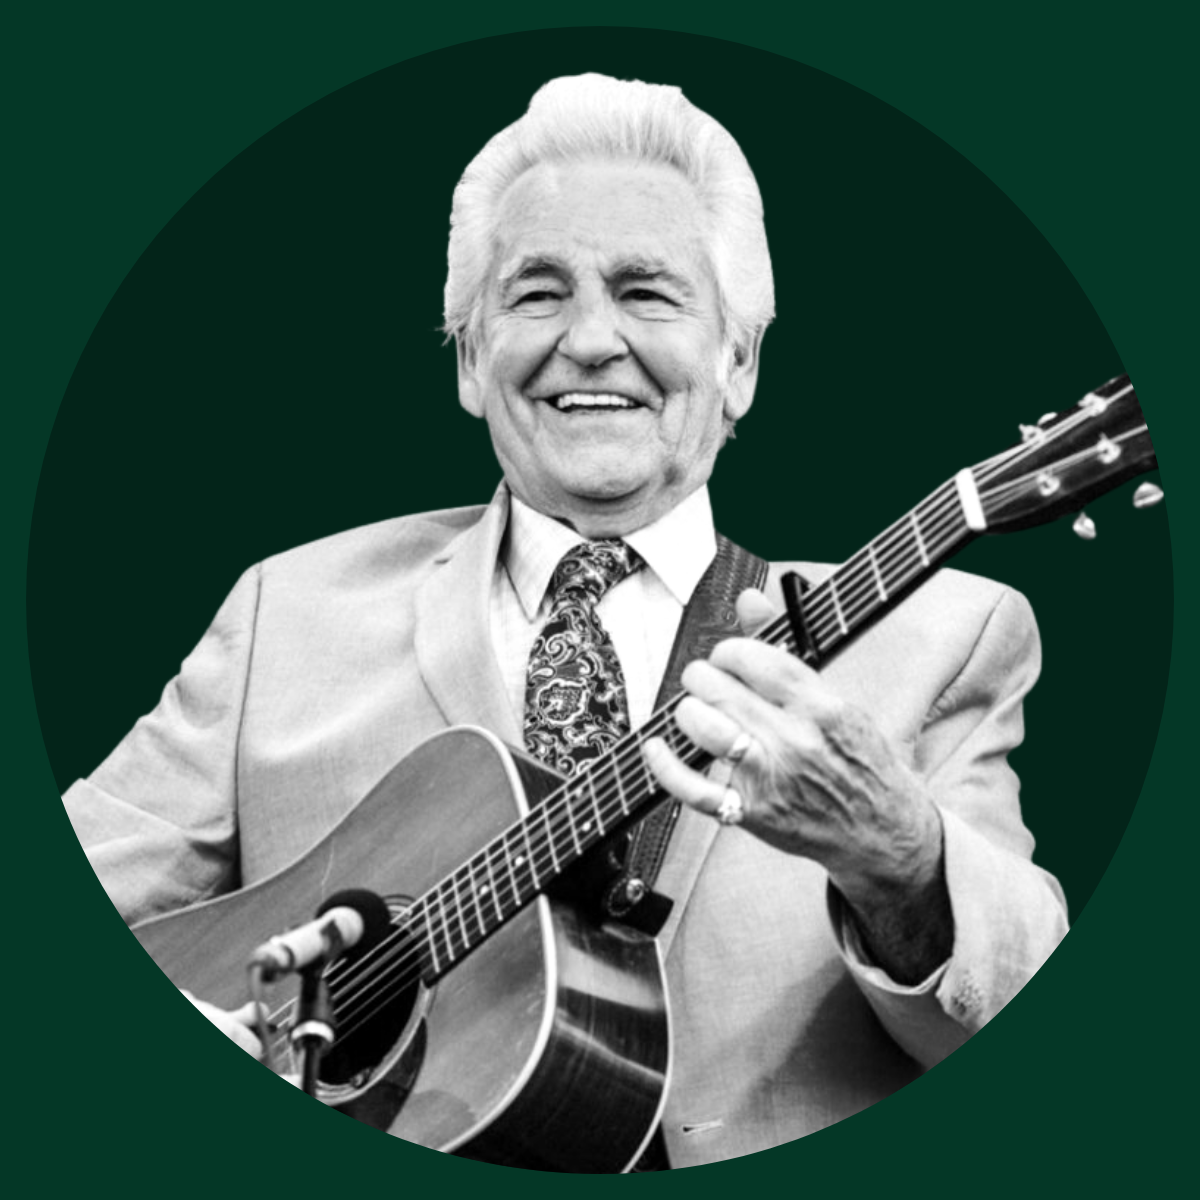 WATCH: The Del McCoury Band Brings Joy to All With 